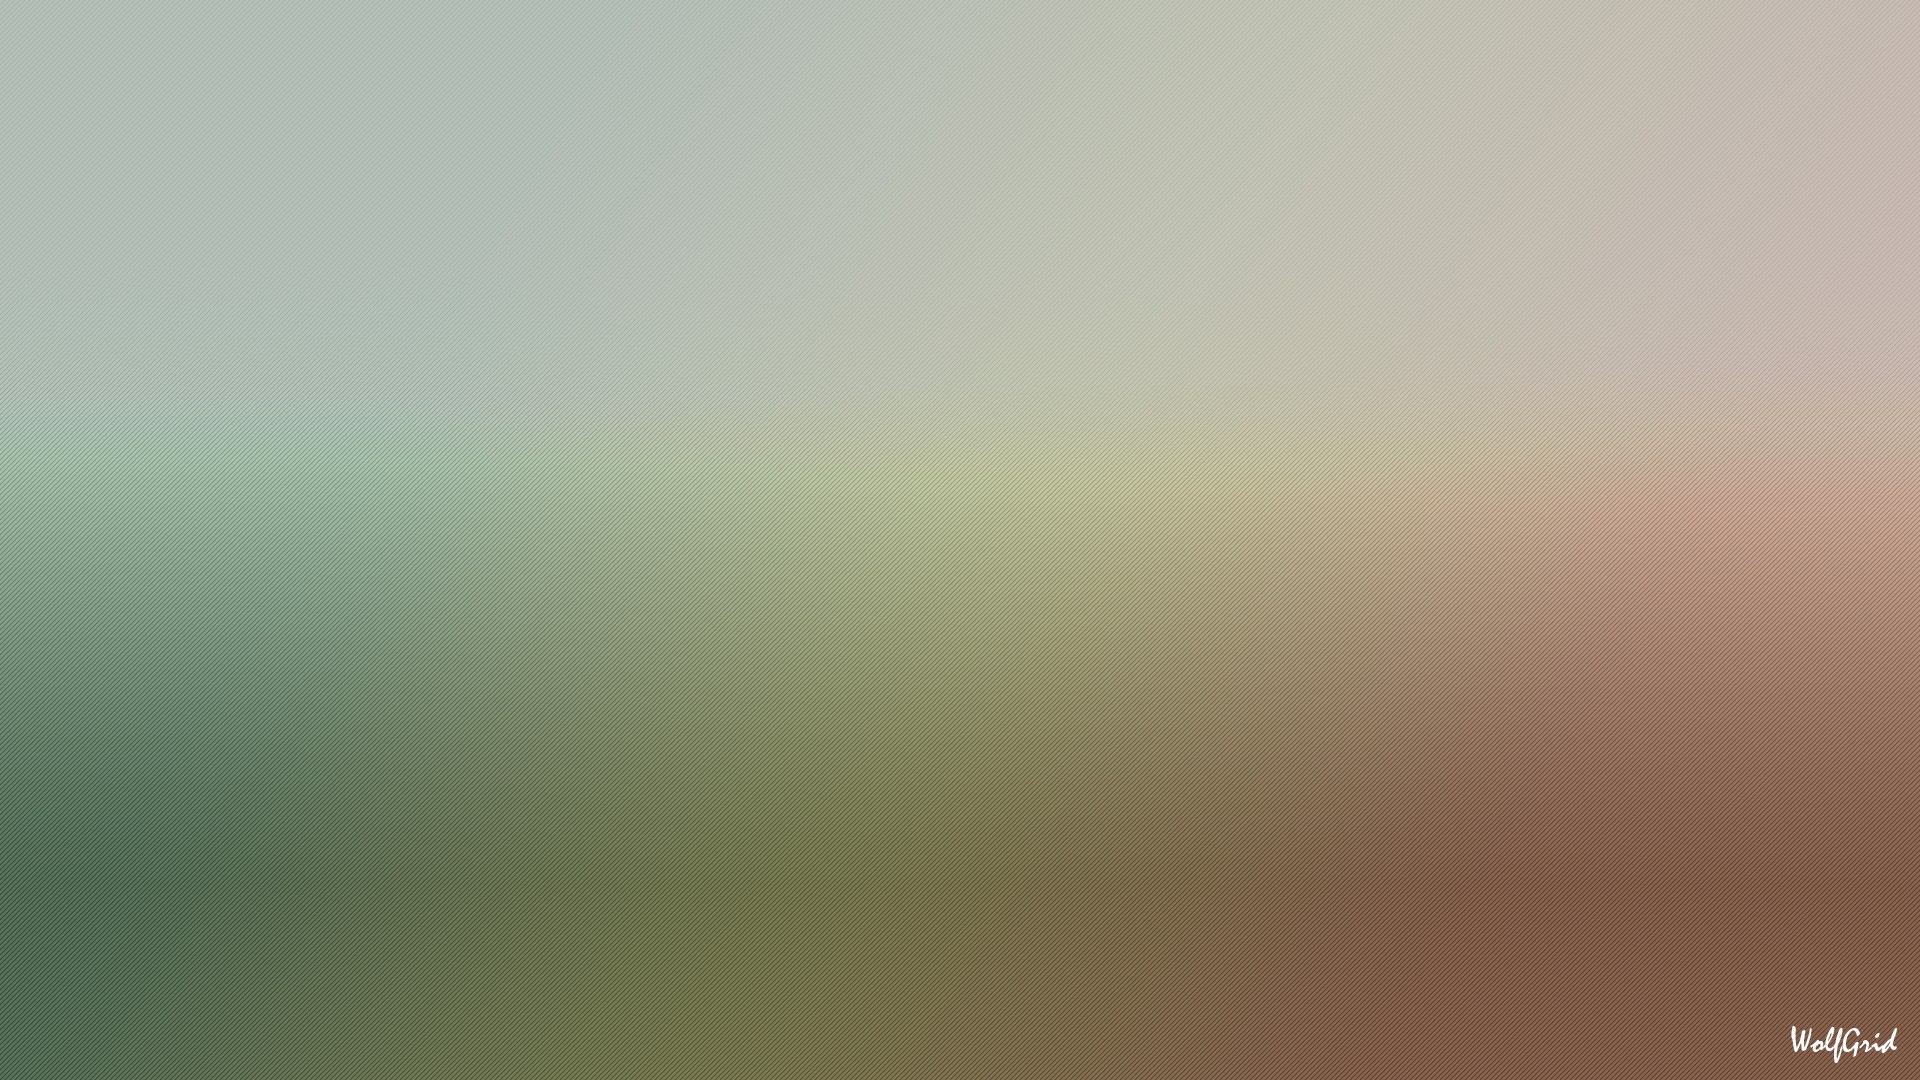 General 1920x1080 colorful blurred gradient texture